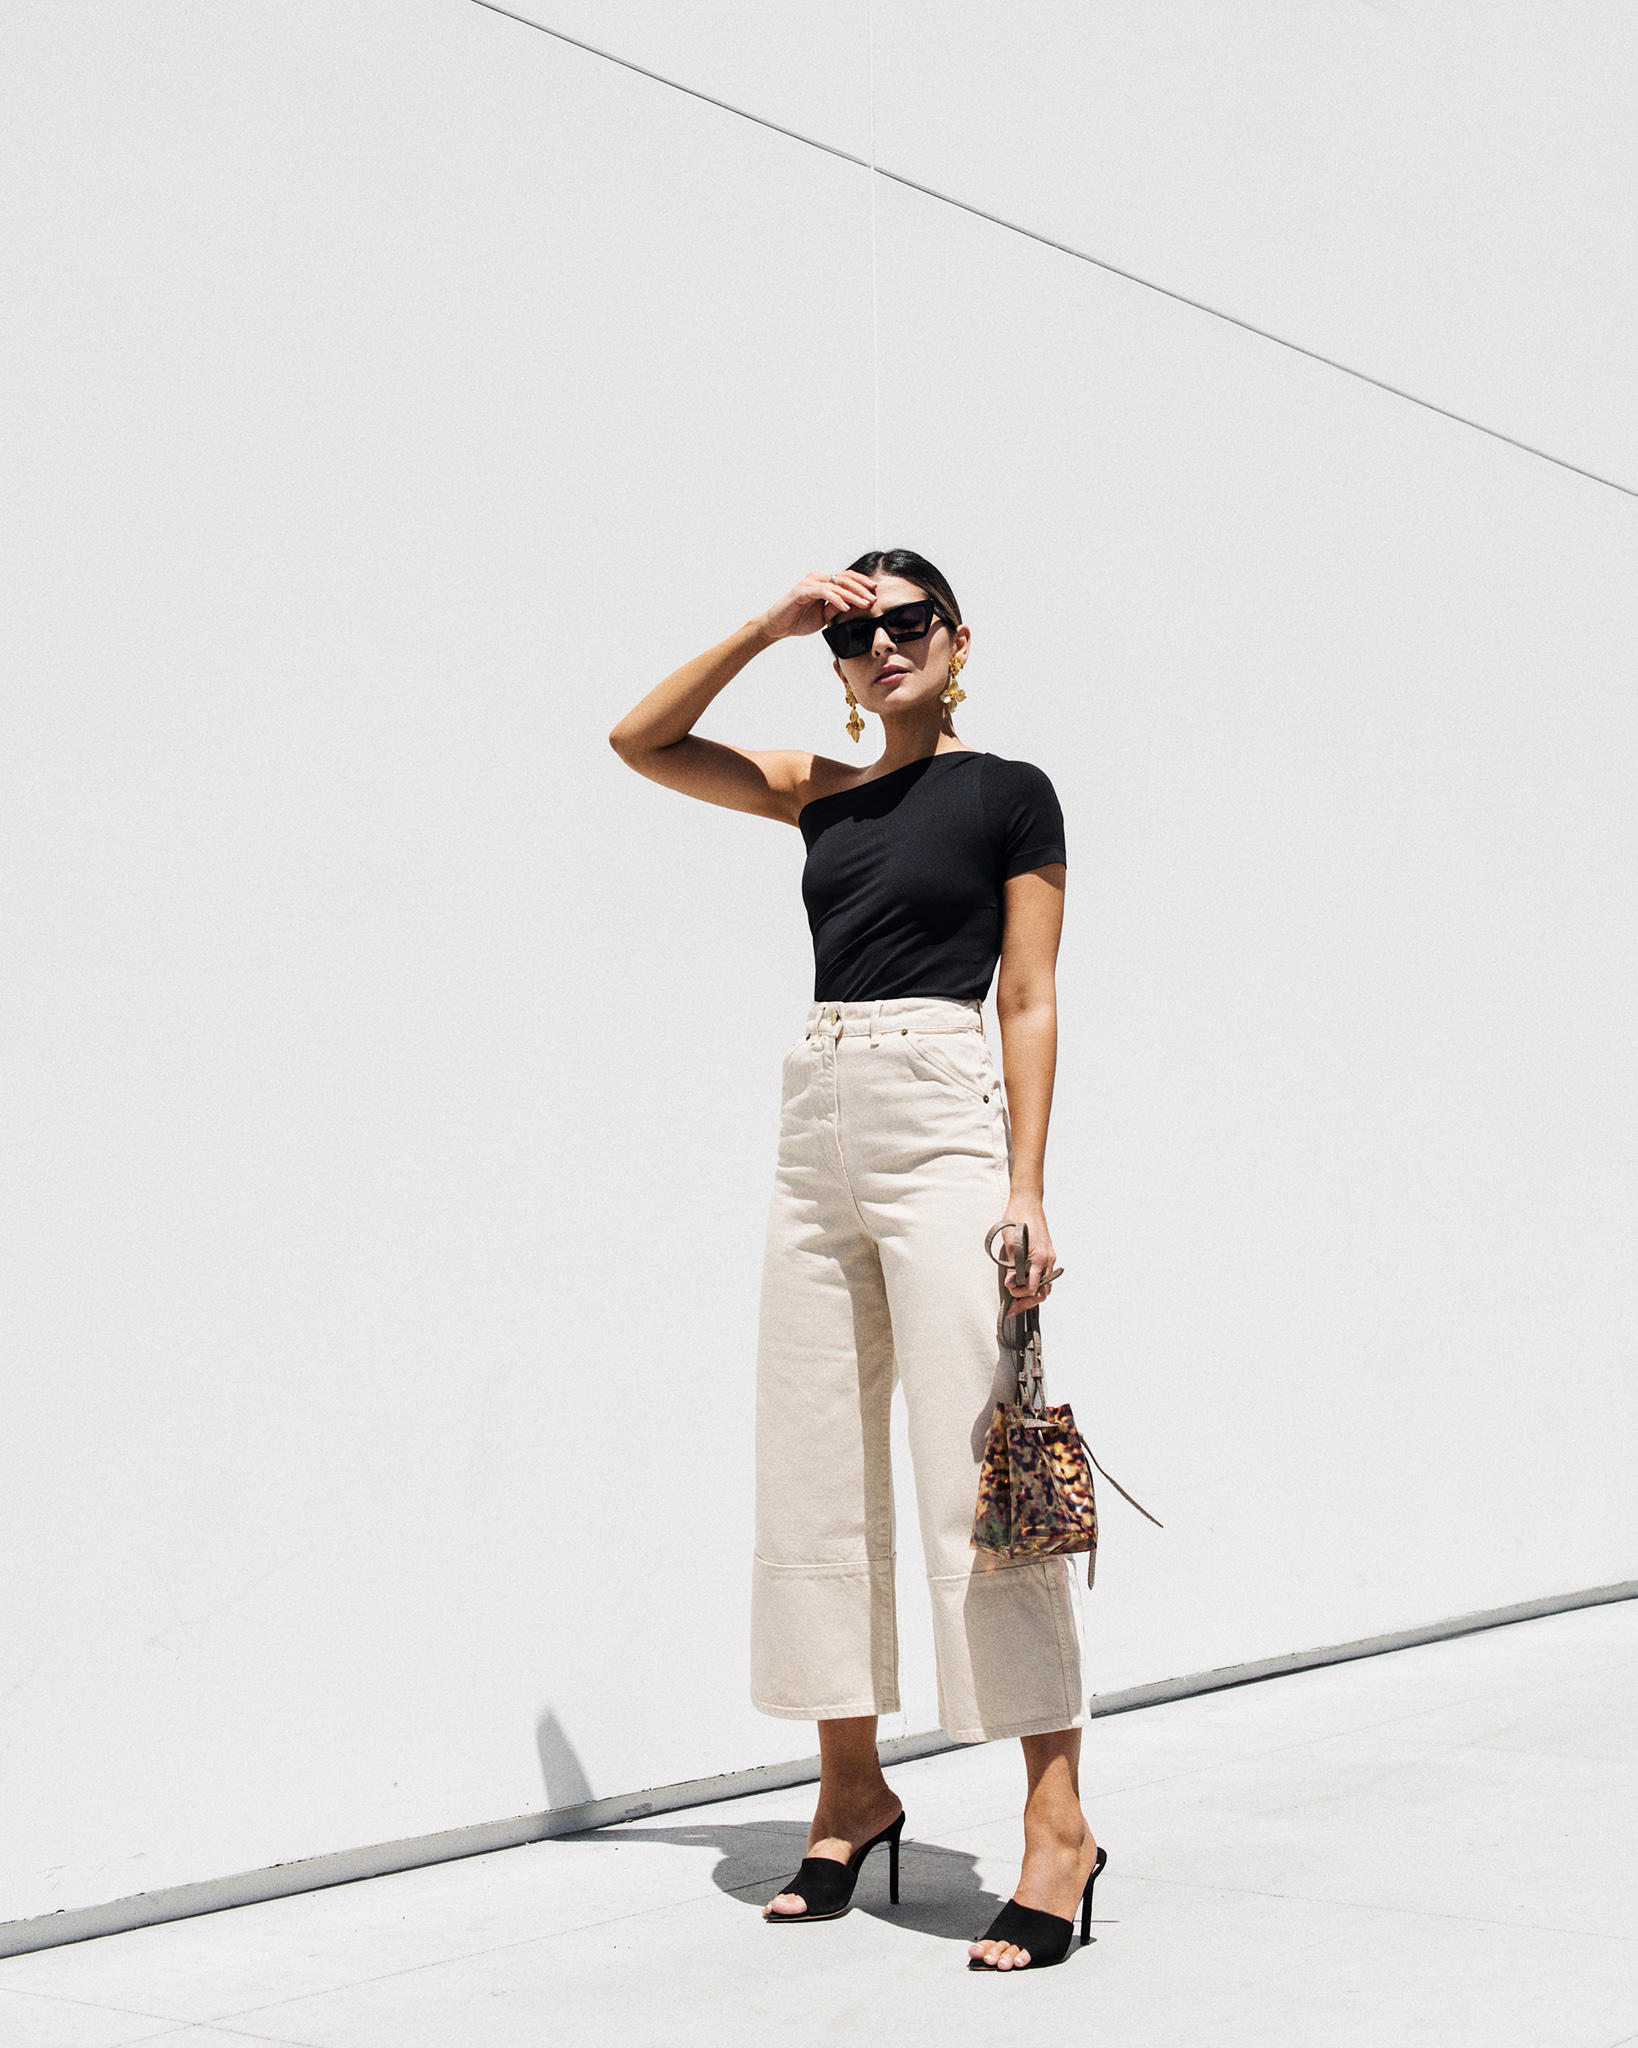 Pieces to bring on your next vacation, trendy vacation outfits, cropped pants trend, saint laurent sunglasses | TheGirlFromPanama.com